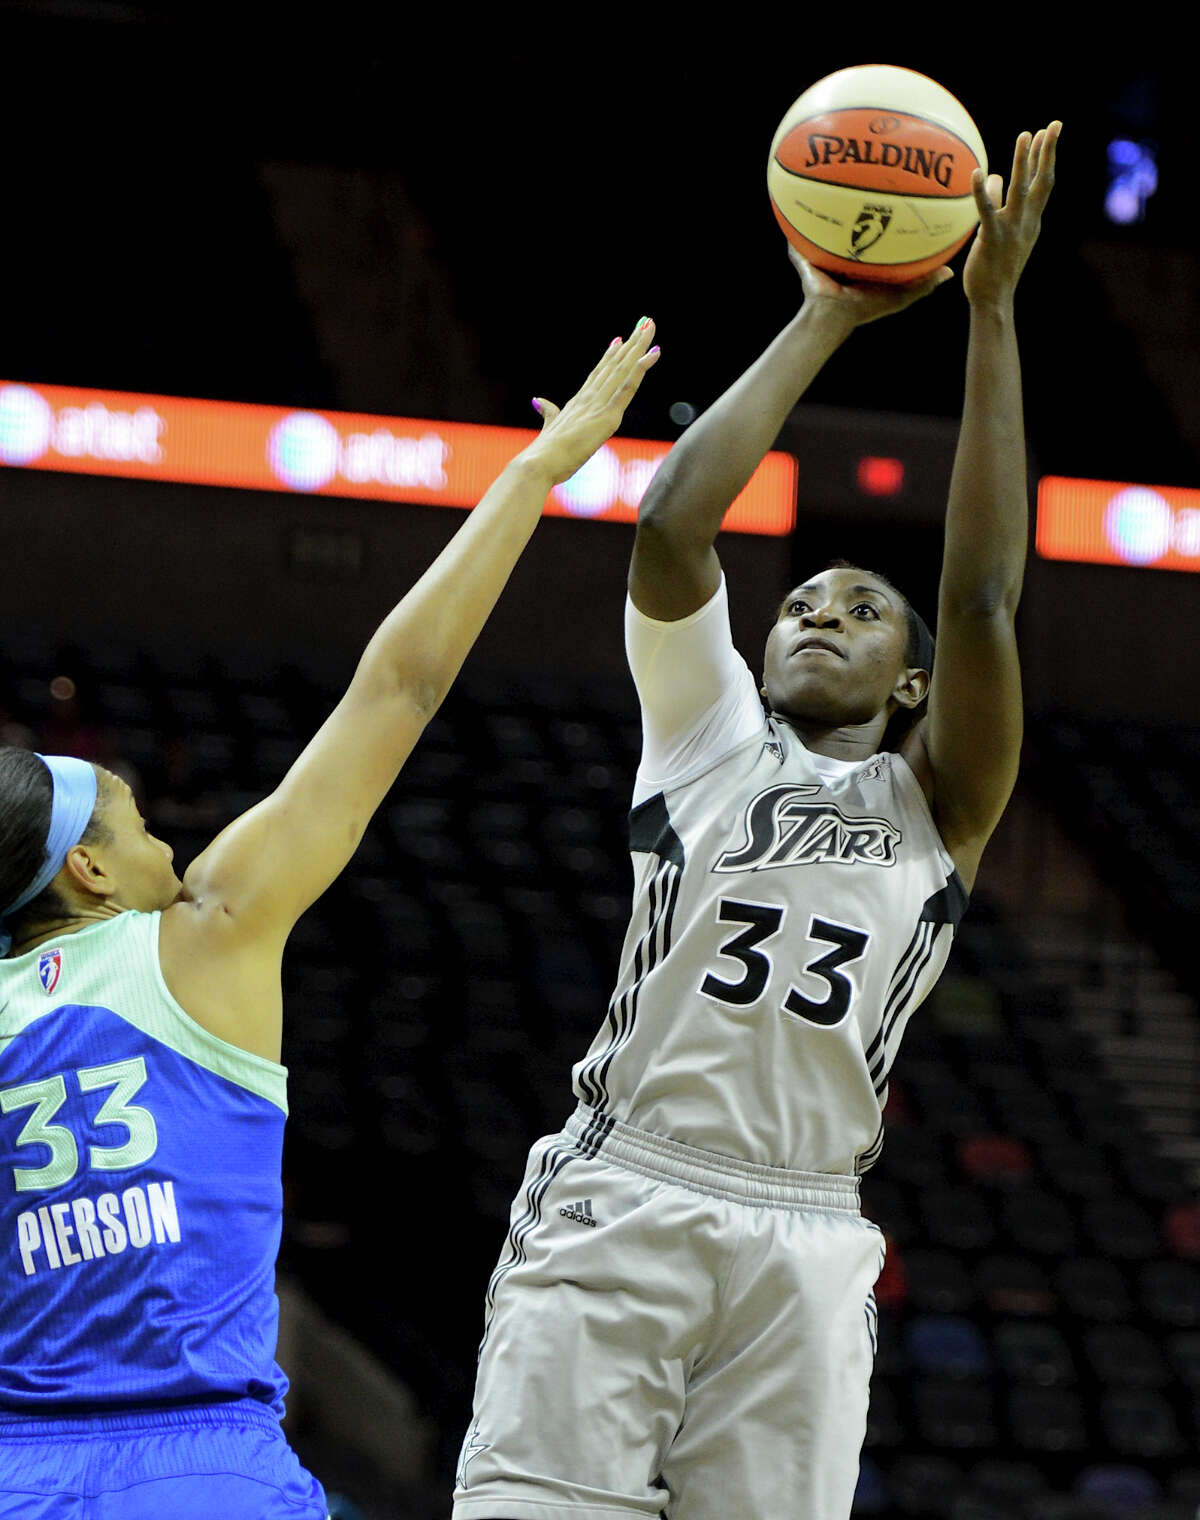 The Silver Stars' Sophia Young (33) takes a shot during a WNBA game between the San Antonio Silver Stars and the New York Liberty on Tuesday, Sept. 18, 2012, at the AT&T Center.